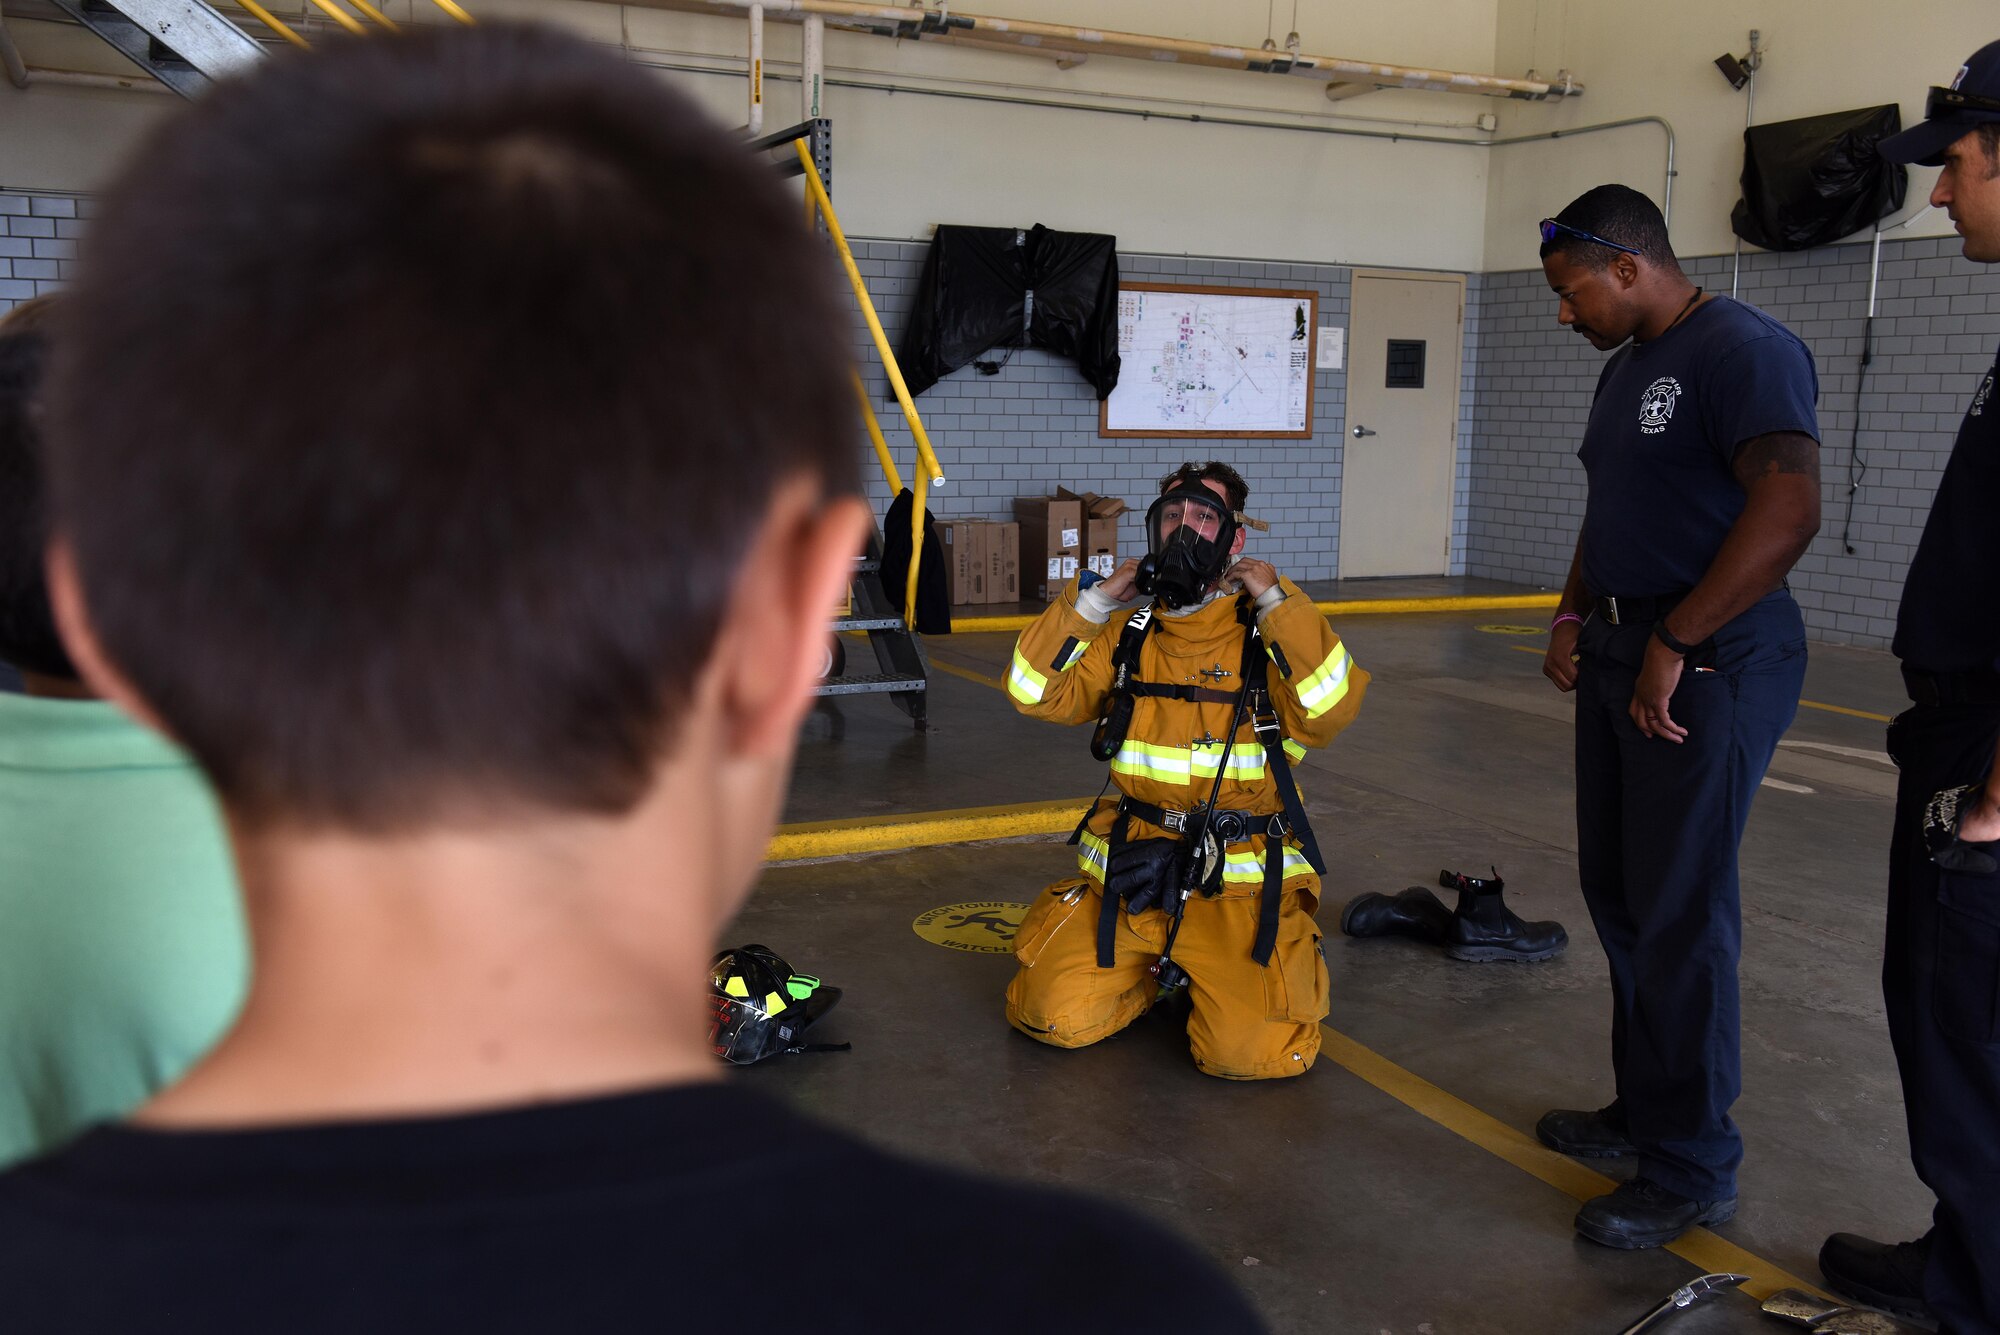 A child watches fire protection professionals demonstrate how to put on bunker gear at the Goodfellow fire department on Goodfellow Air Force Base, Texas, April 28, 2017. The fire protection professionals also taught them about the necessity of motion sensors and air tanks. (U.S. Air Force photo by Airman 1st Class Caelynn Ferguson/ Released)